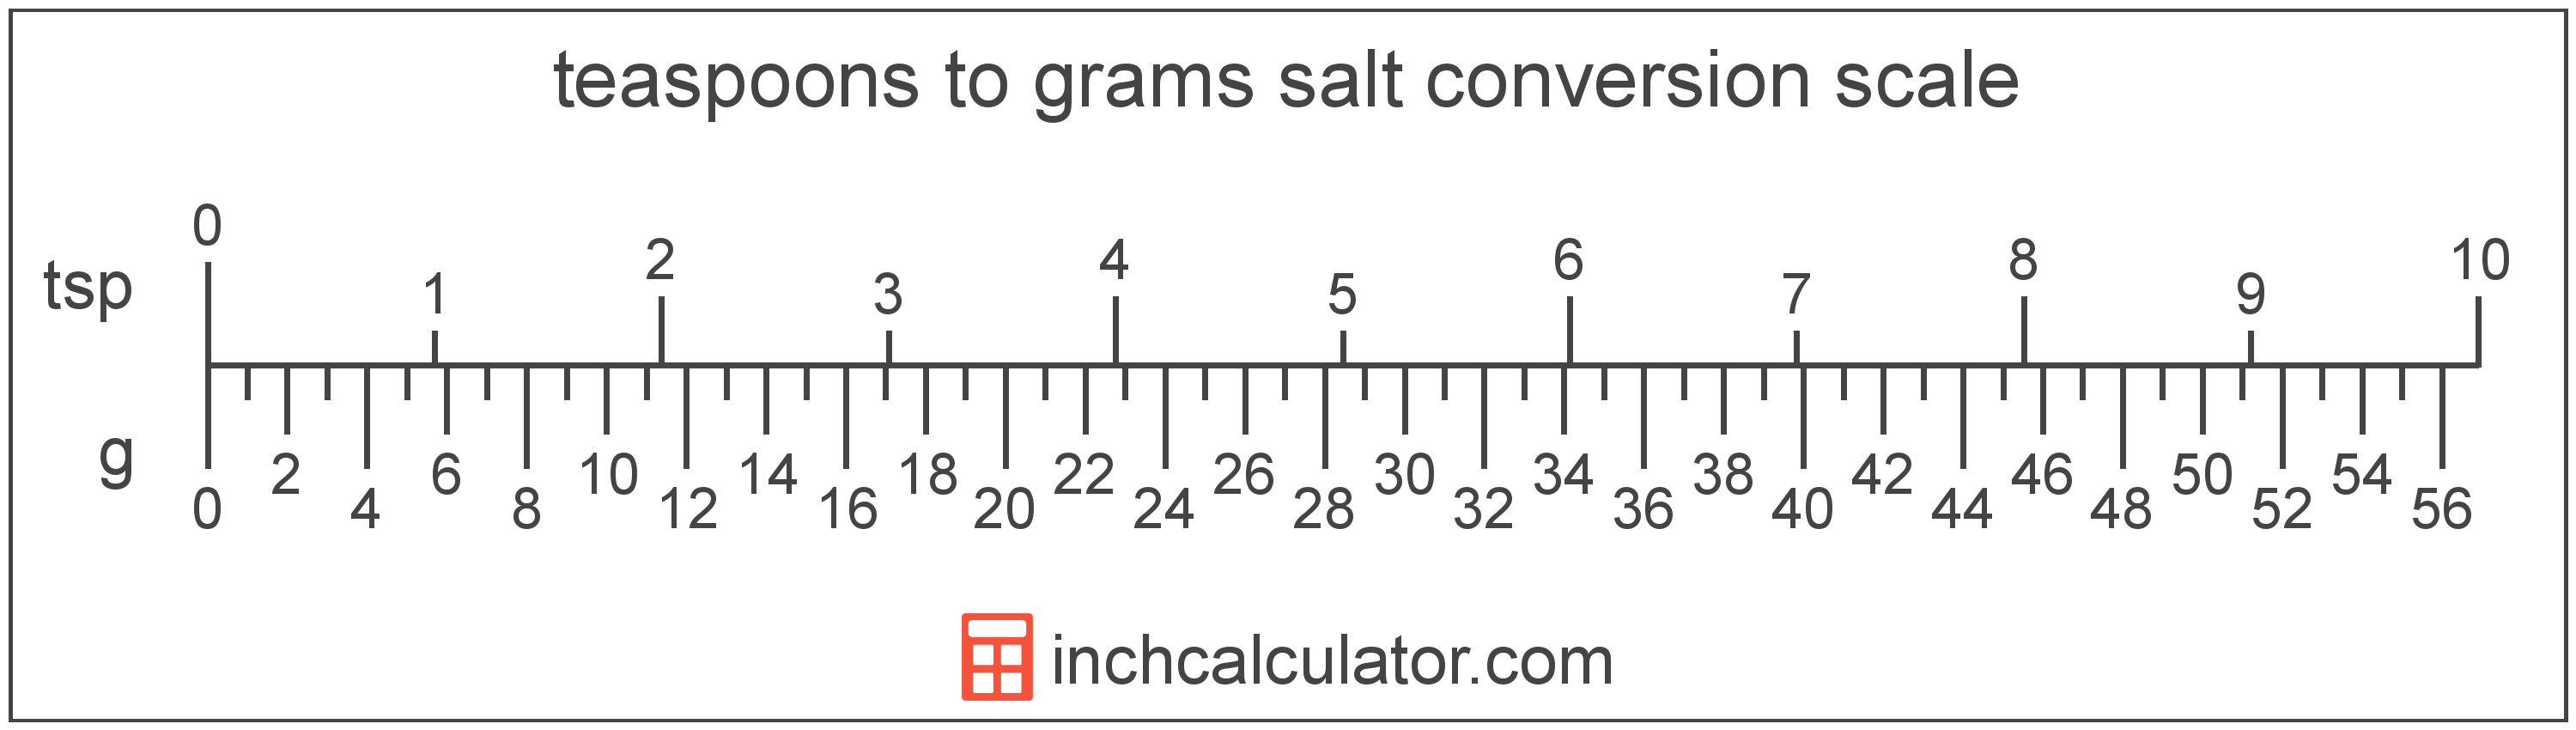 conversion scale showing teaspoons and equivalent grams salt volume values